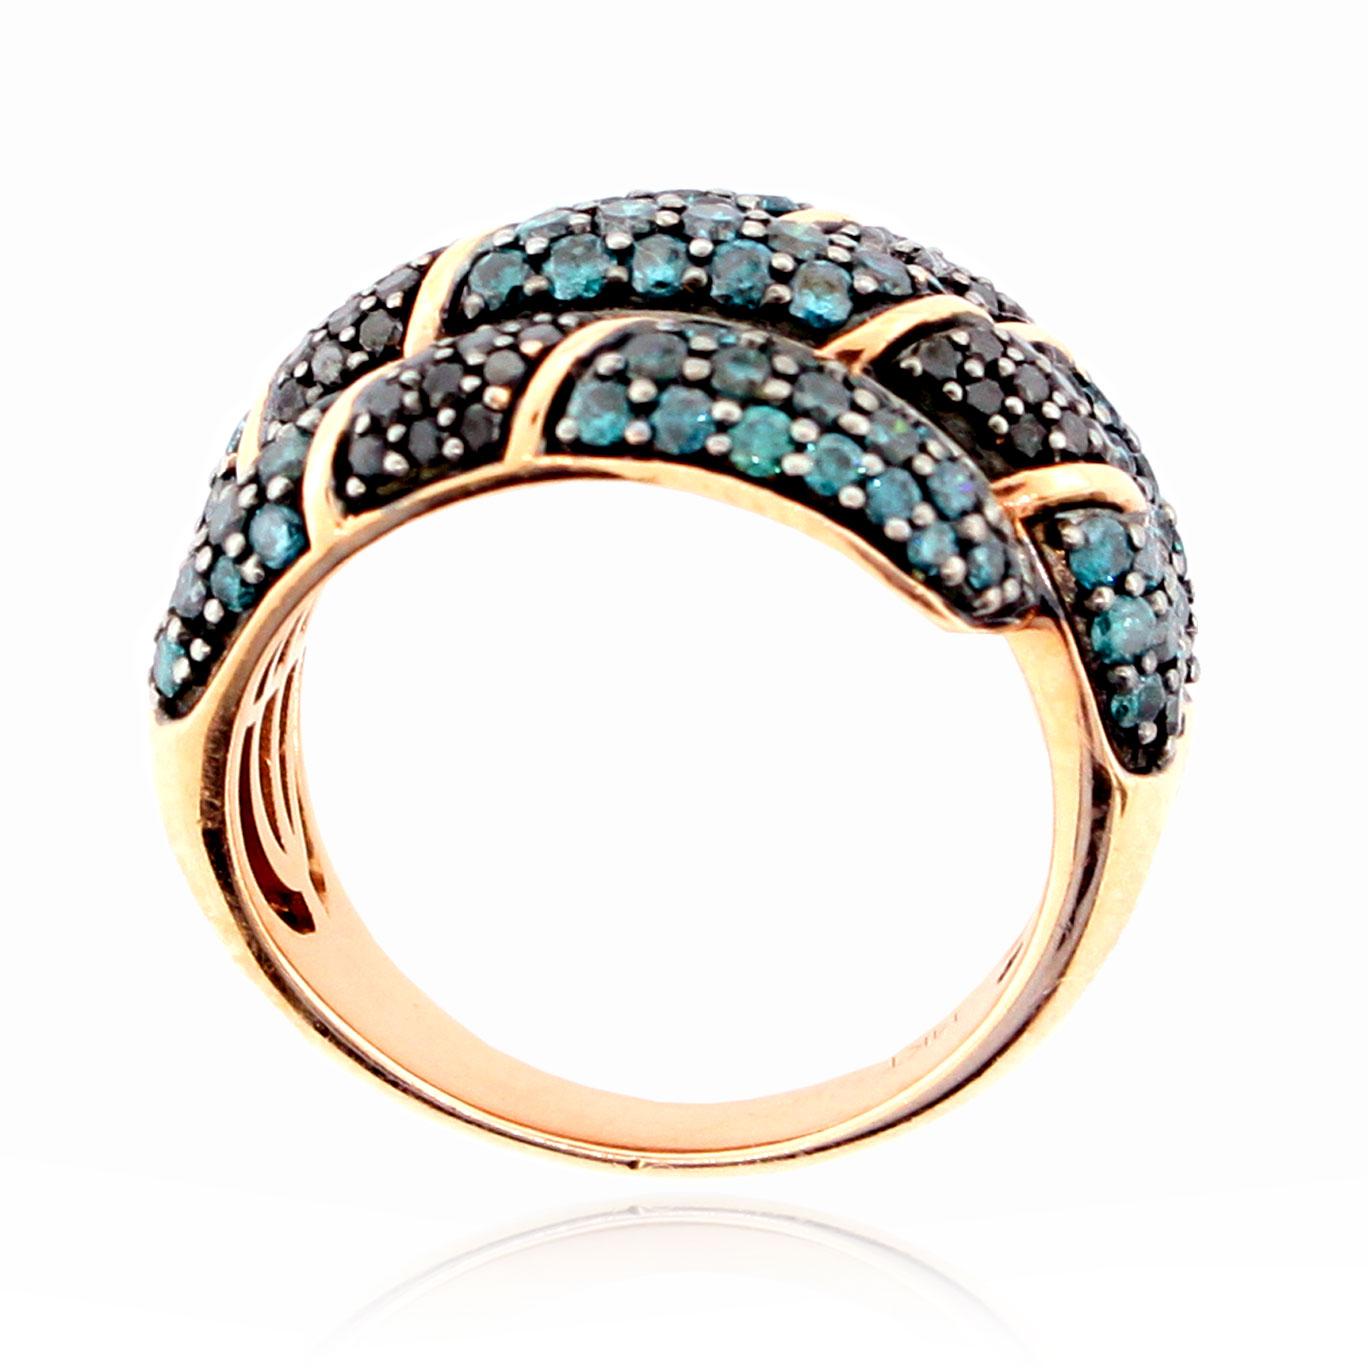 This spectacular ring from the Suzy Levian Limited Edition collection features pave blue and black diamonds (2.05 ct TDW) wrapped around your finger in a 14k rose gold setting. The crossover pattern is both delicate and bold as it blends together